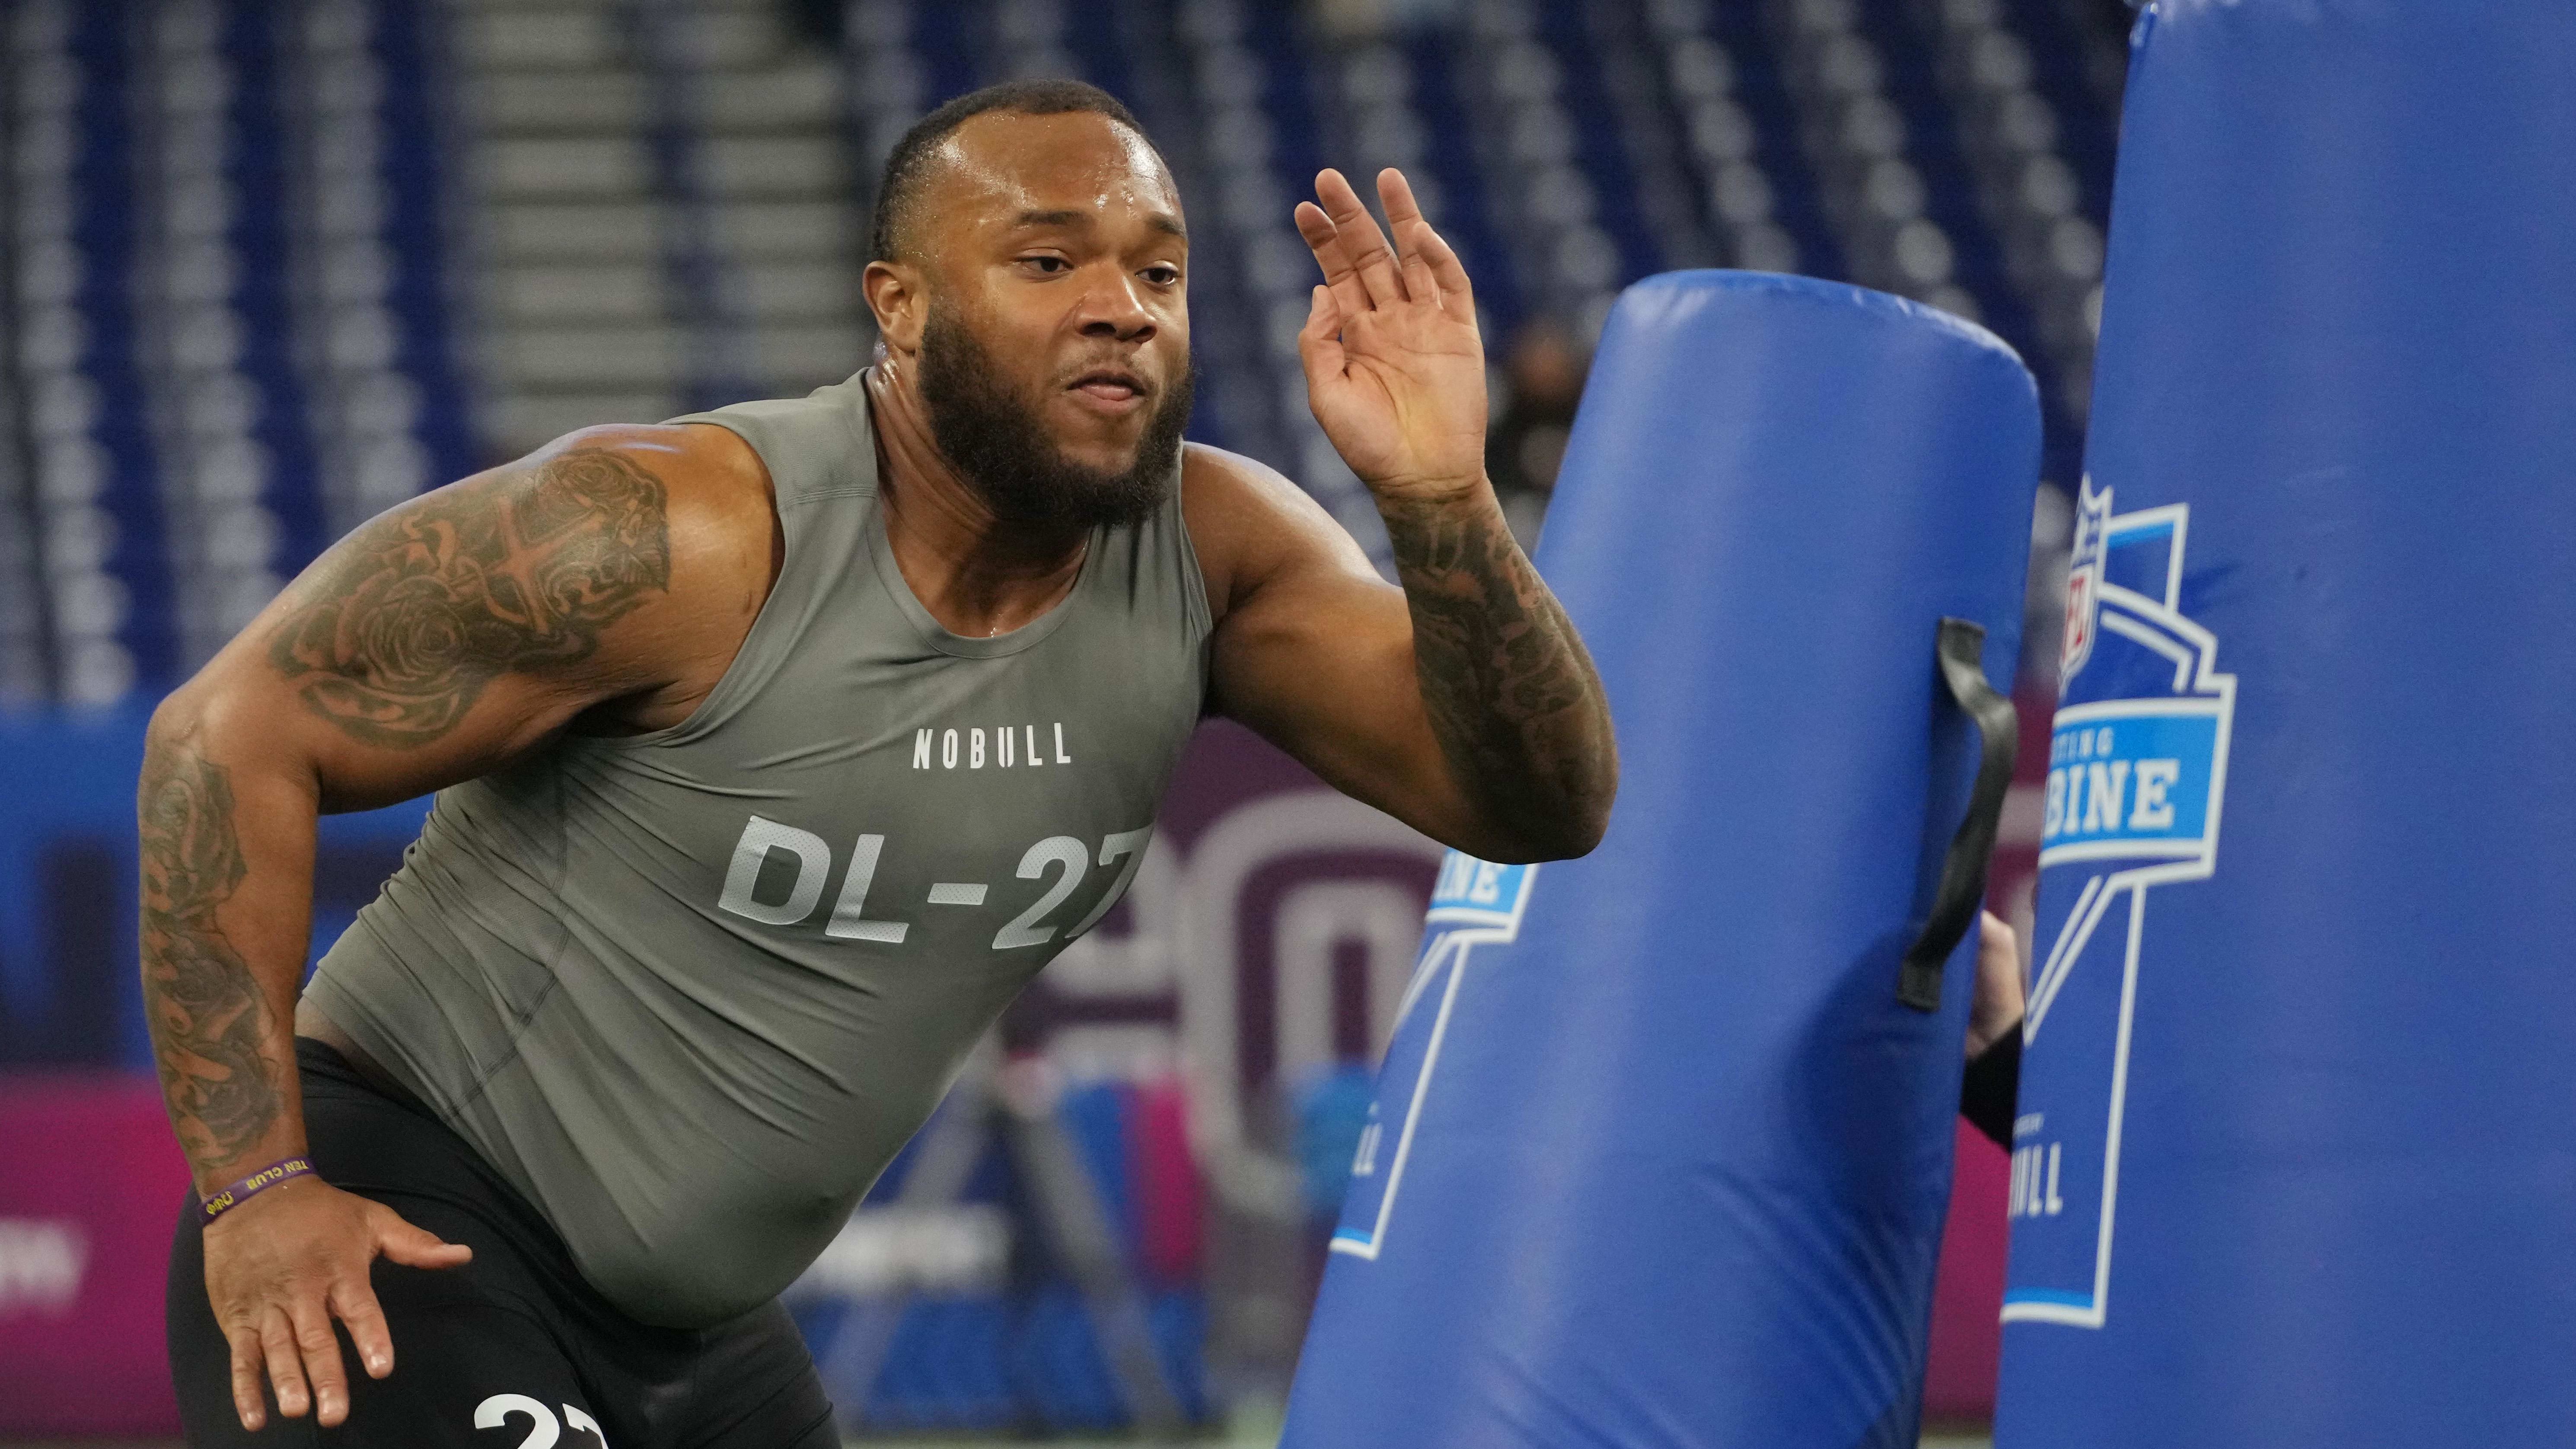 Louisiana State defensive lineman Mekhi Wingo (DL27) works out at the NFL Scouting Combine.